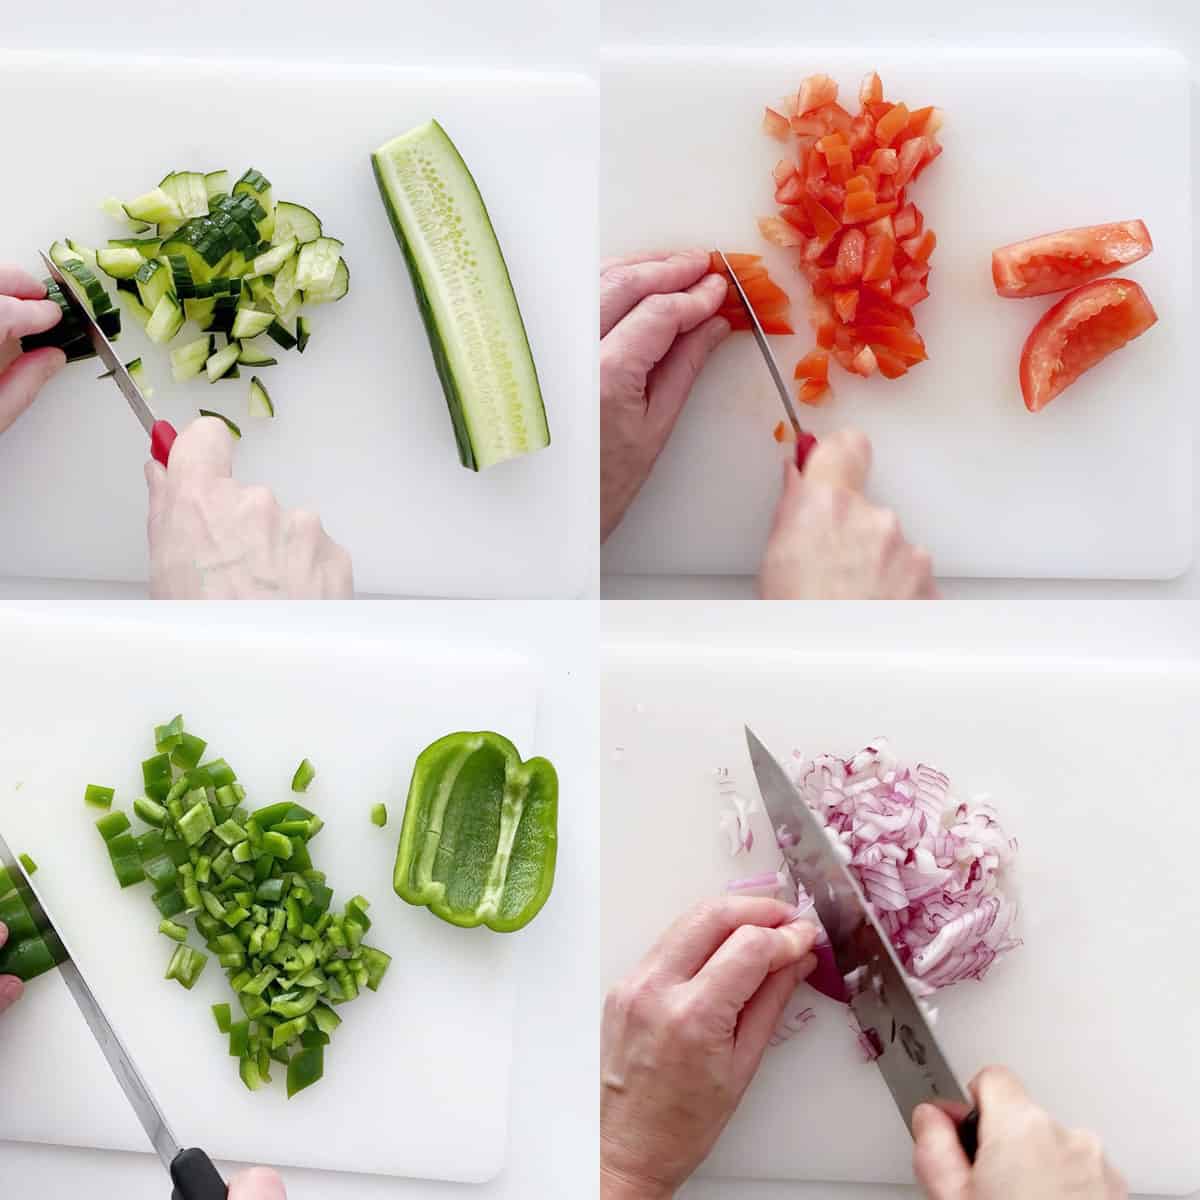 A four-photo collage showing how to dice the vegetables (cucumber, tomato, pepper, and red onion).